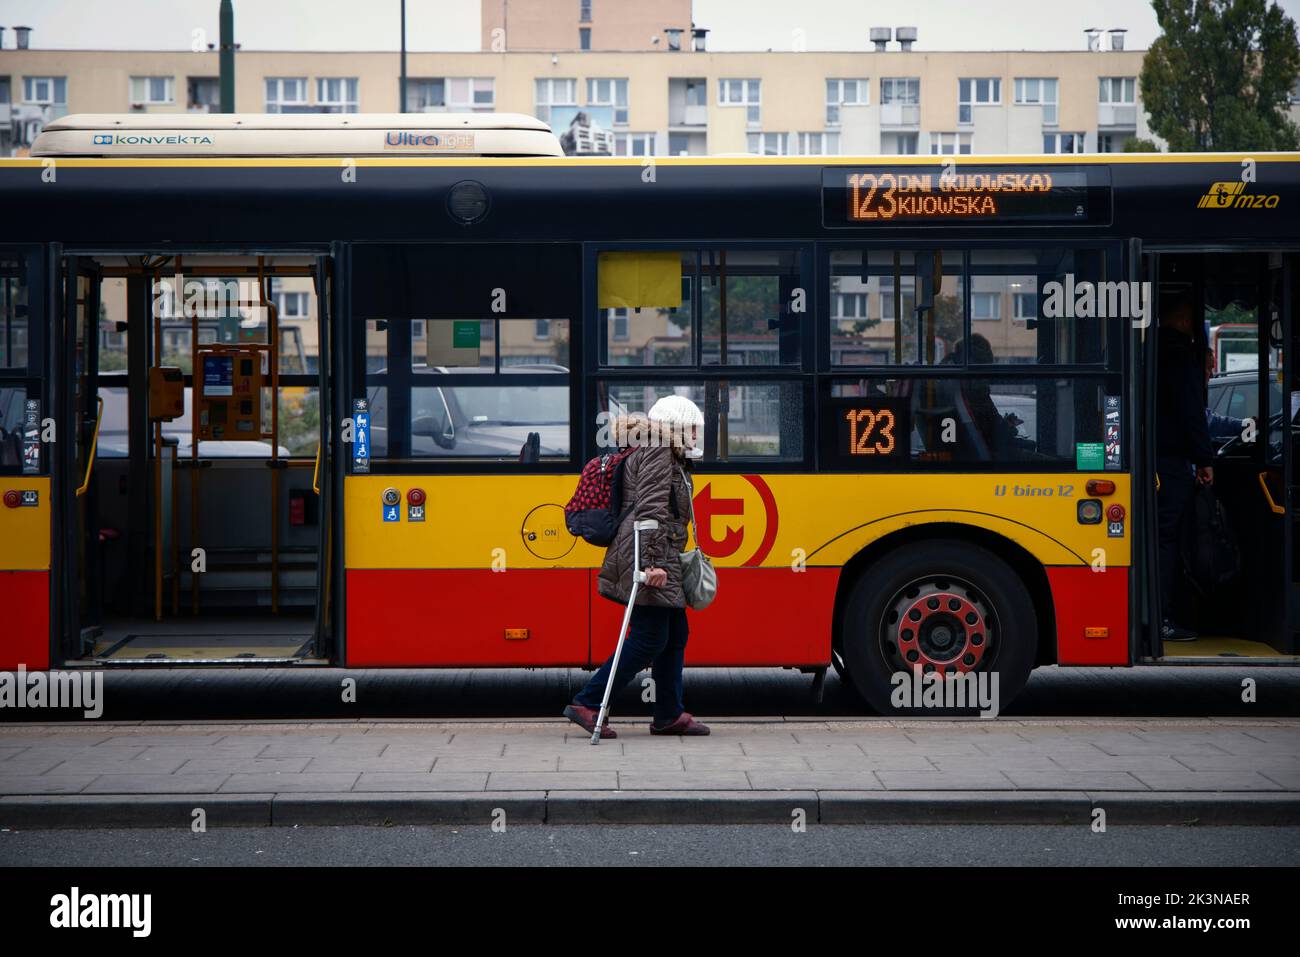 An elderly woman with crutches walks past a bus at the Warsaw East railway station in Warsaw, Poland on 27 September, 2022. Poland's agein population has sharply decreased Poland's agein population has sharply decreased in just the last decade, declining by nearly Poland's agein population has sharply decreased in just the last decade, declining by nearly half a million. The country's population is also ageing Poland's agein population has sharply decreased in just the last decade, declining by nearly half a million. The country's population is also ageing with every fifth citizen being 65 yea Stock Photo